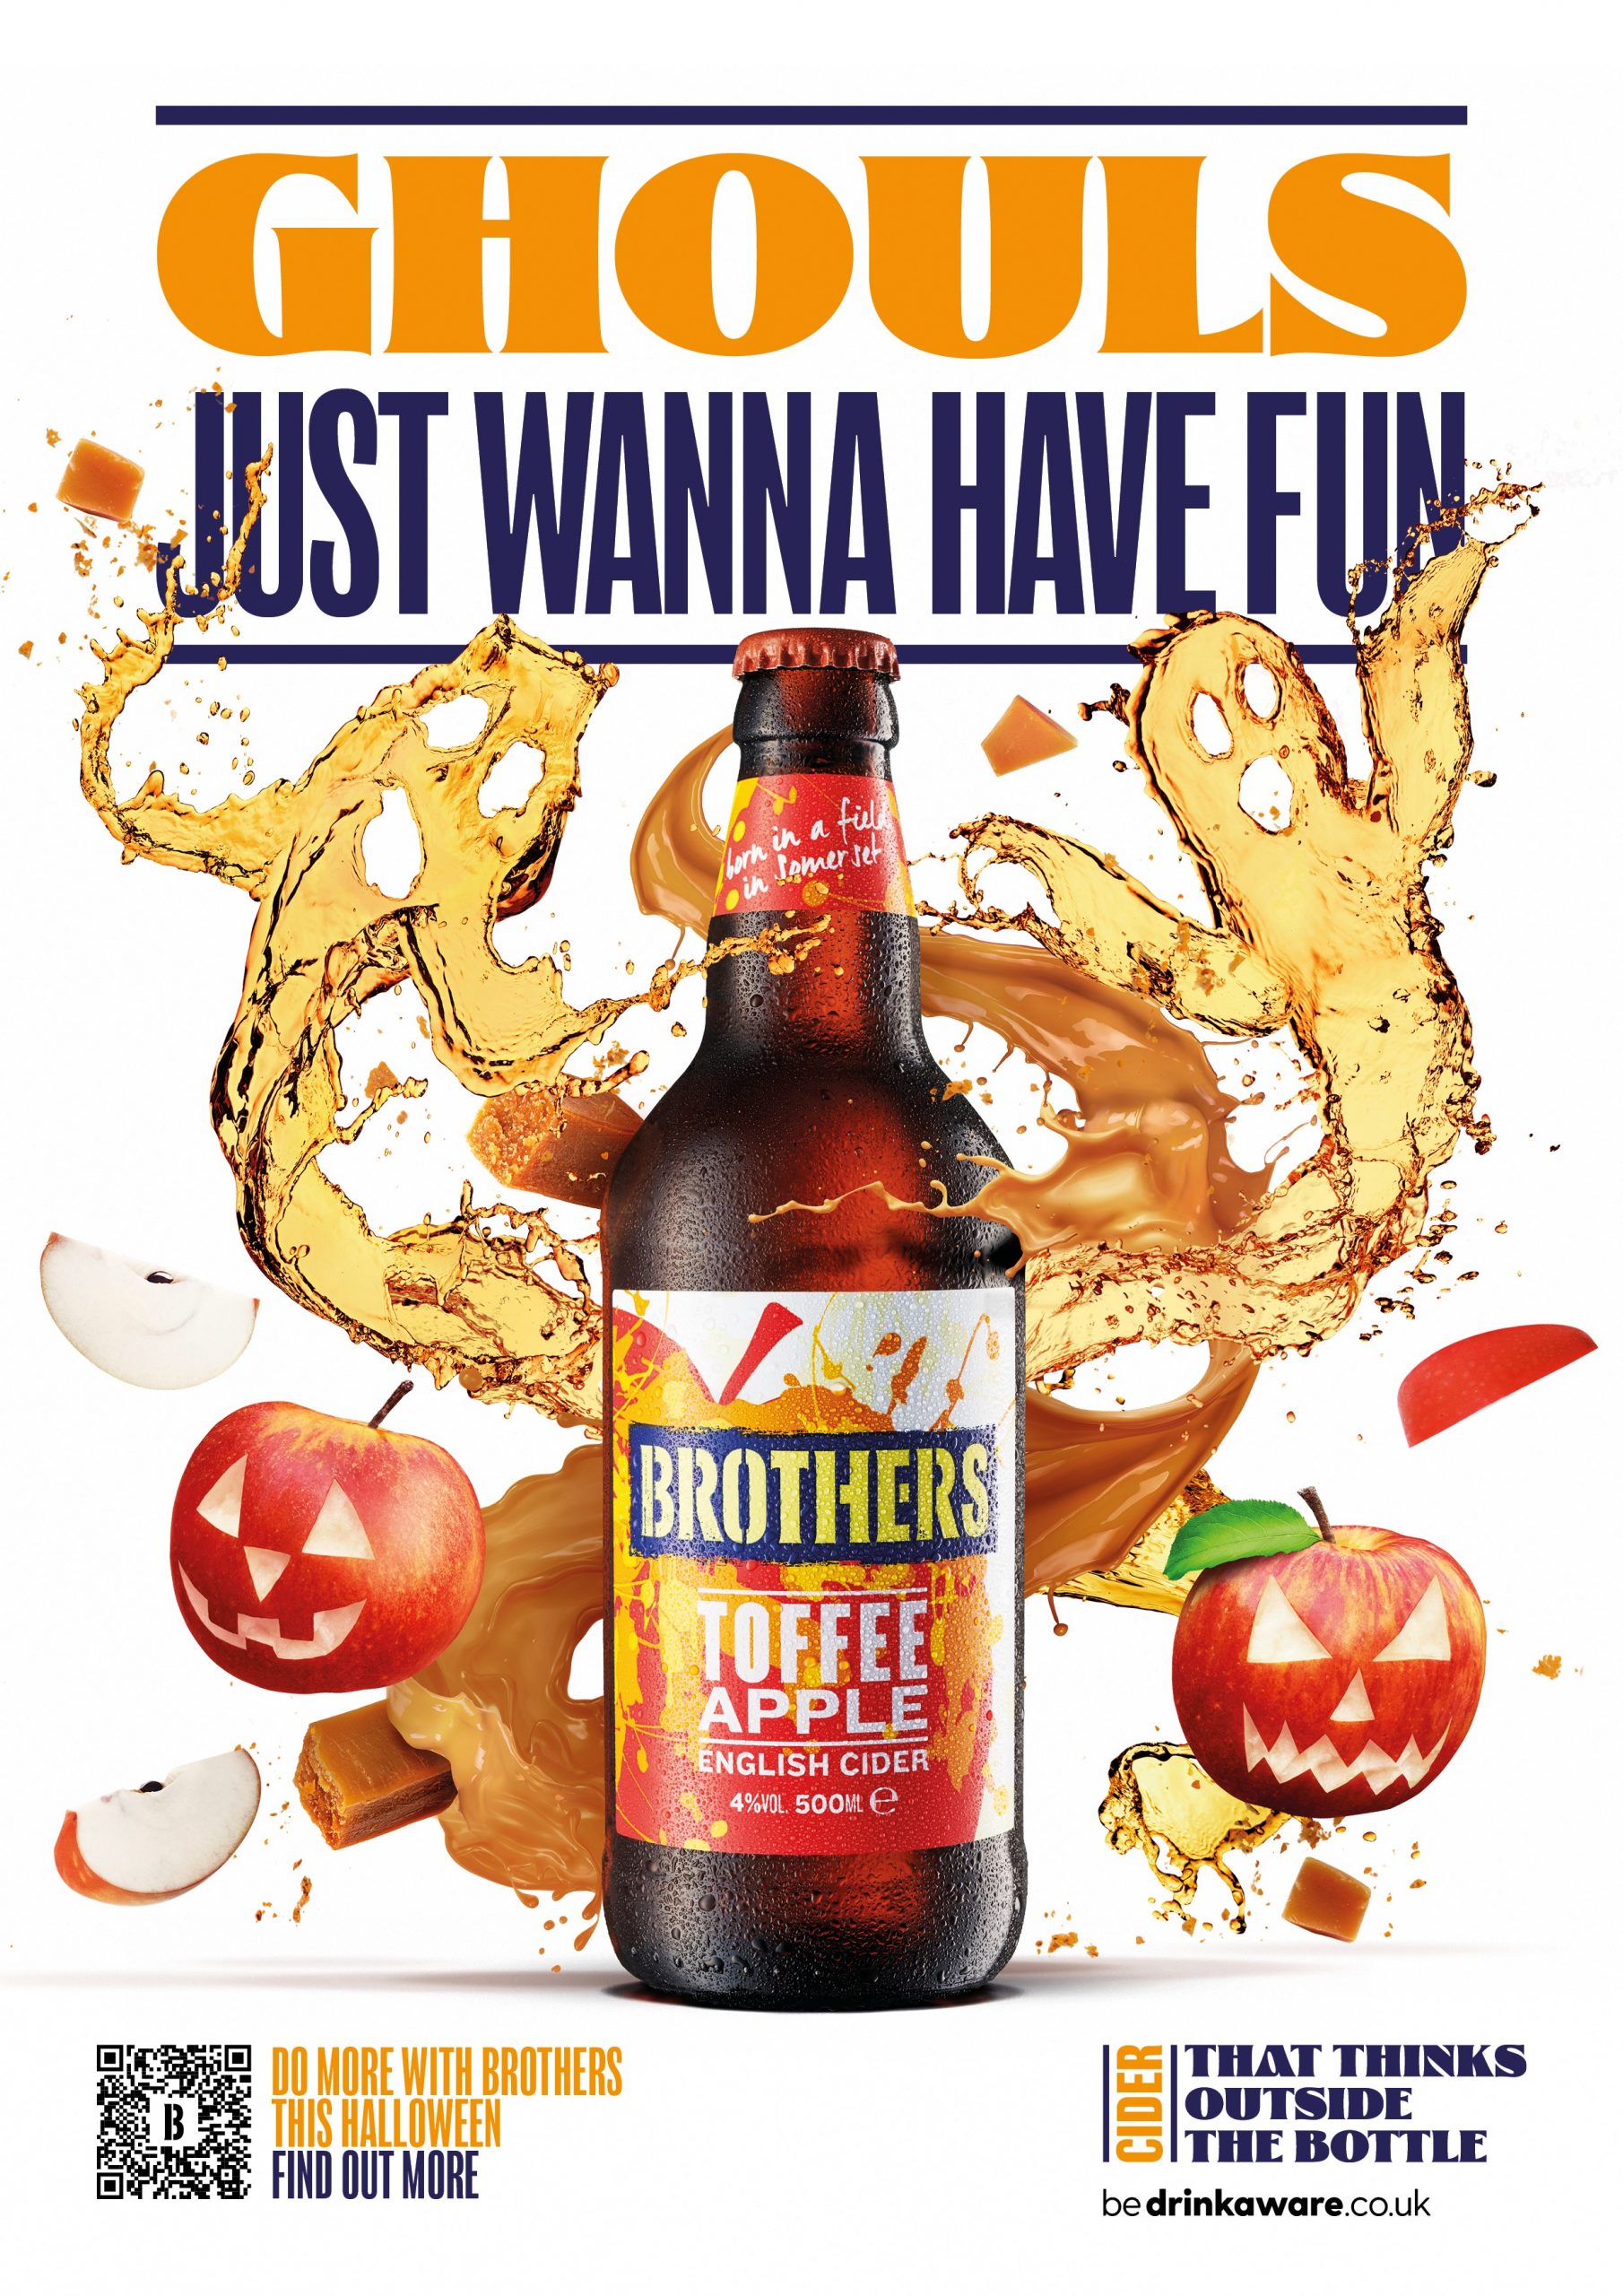 Brothers Cider launches new campaign for Halloween